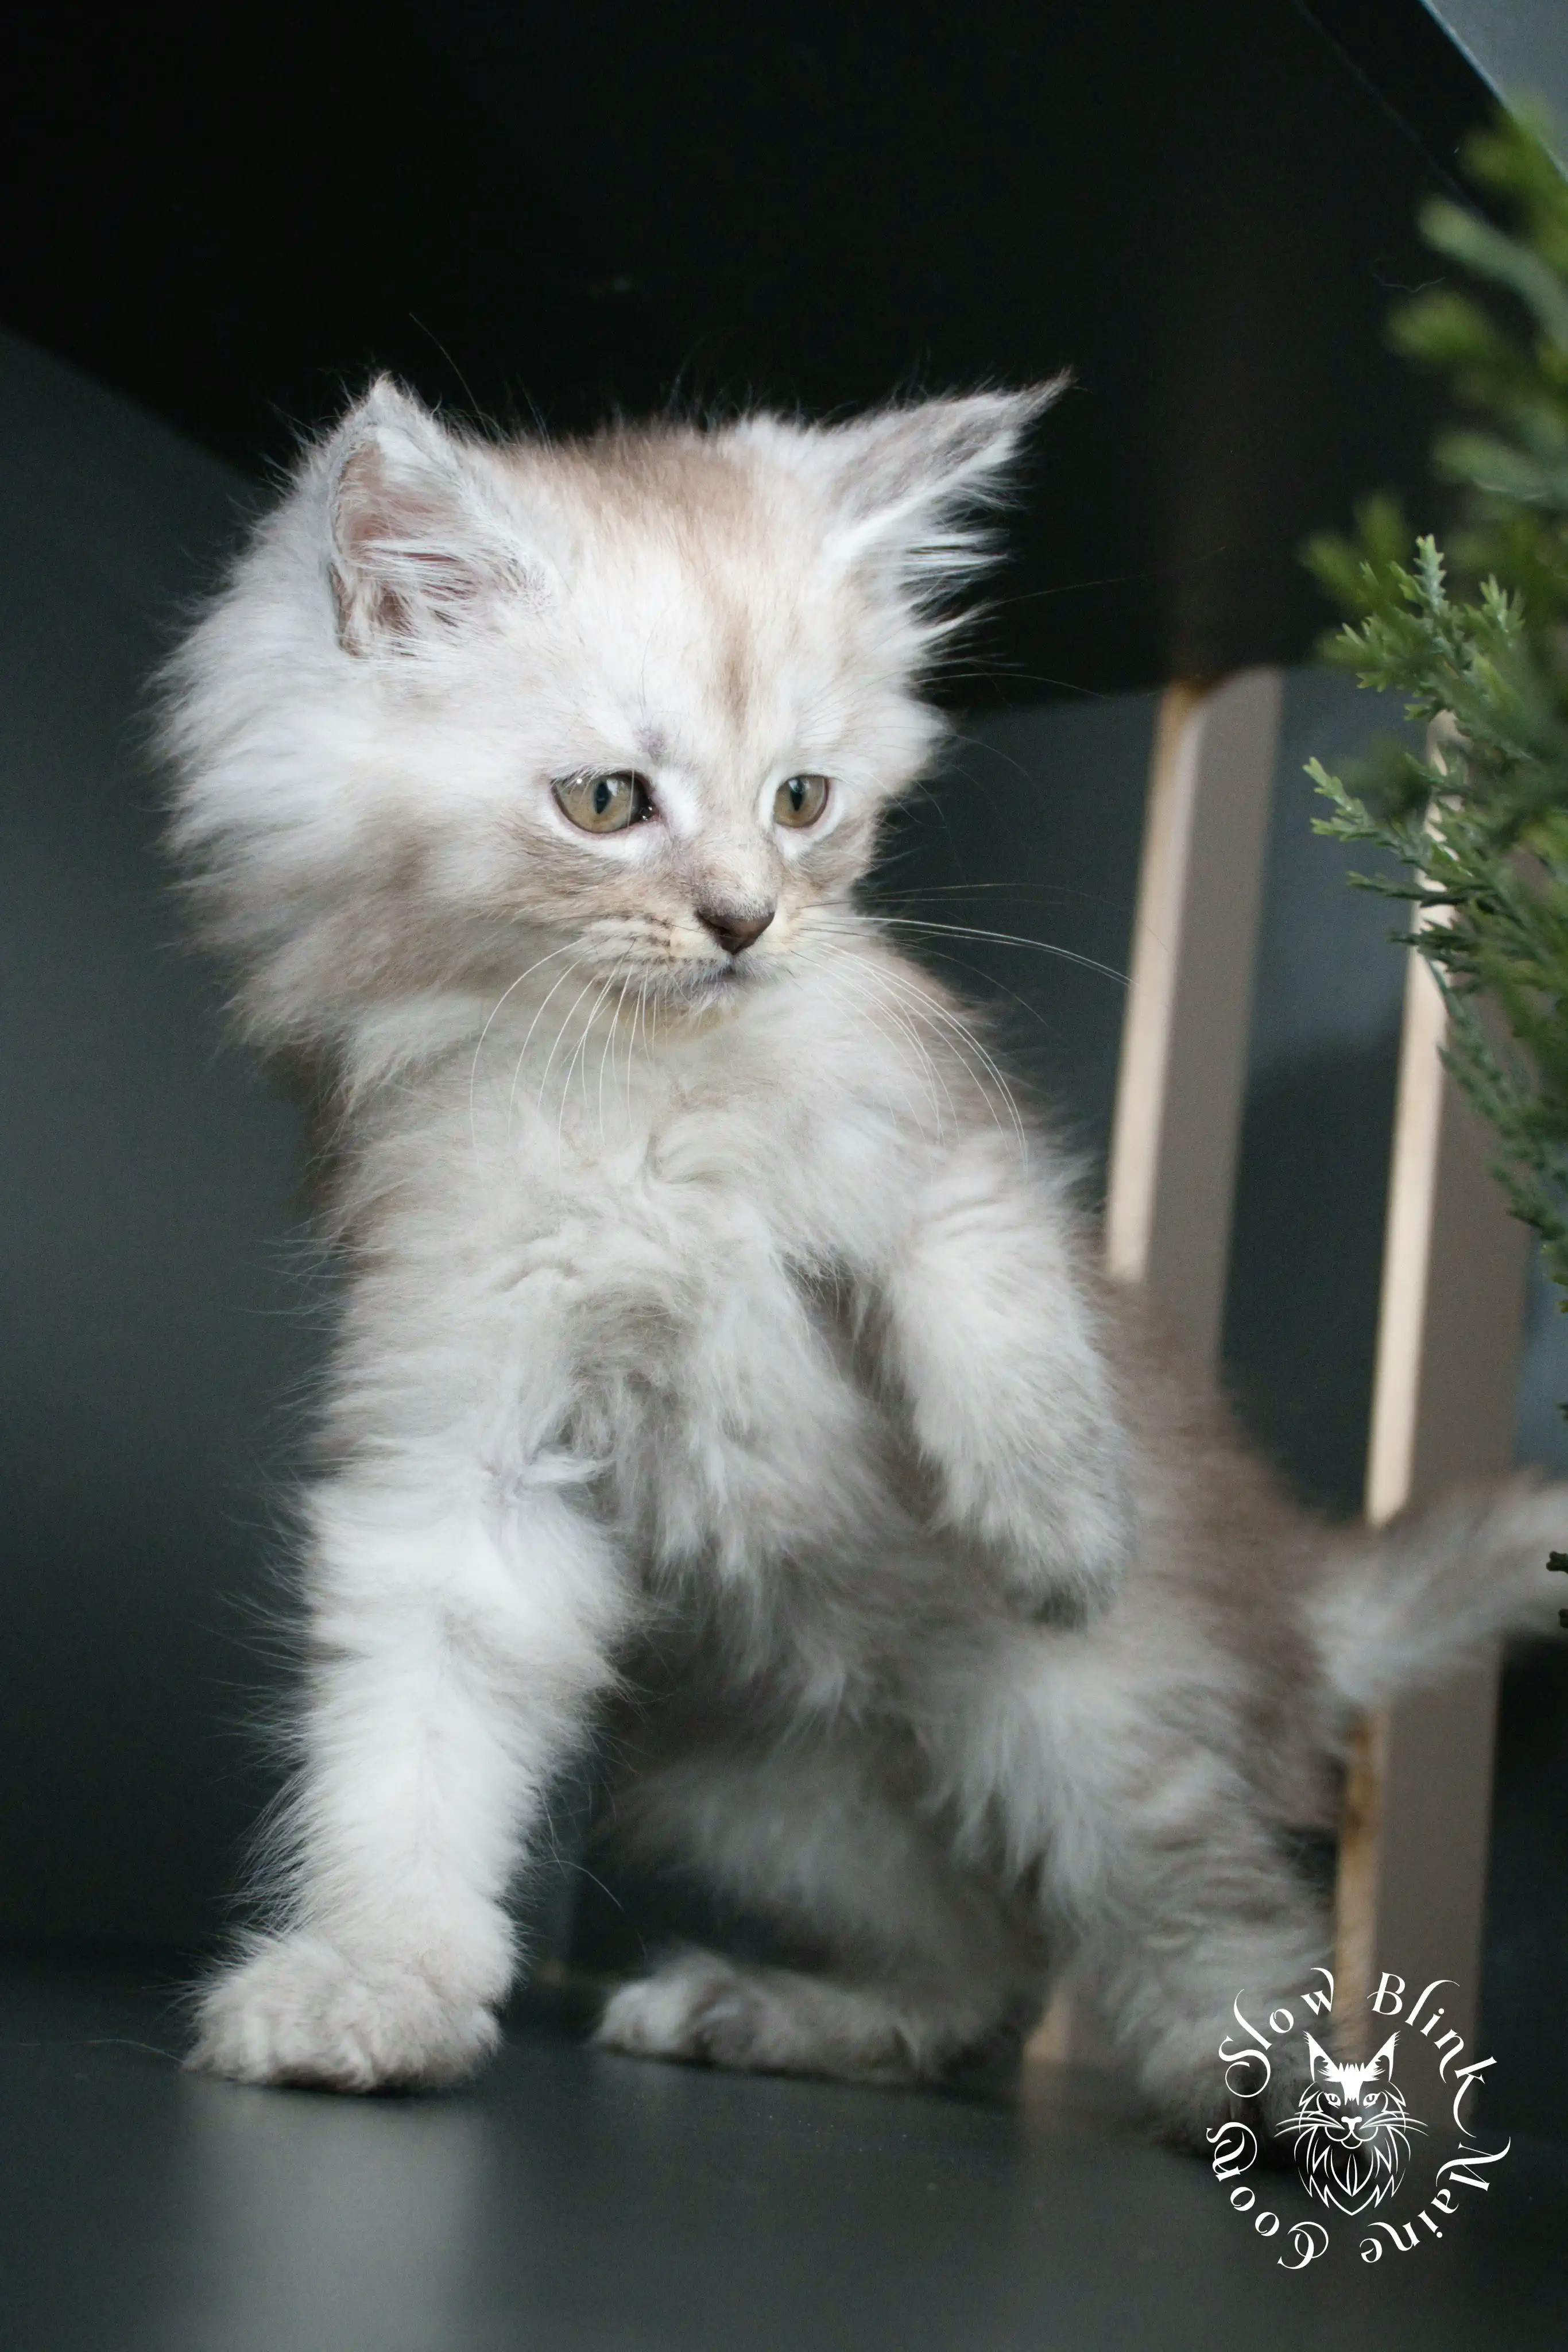 High Silver Maine Coon Kittens > black silver tabby maine coon kitten | ems code ns 22 23 24 25 | slowblinkmainecoons | 376